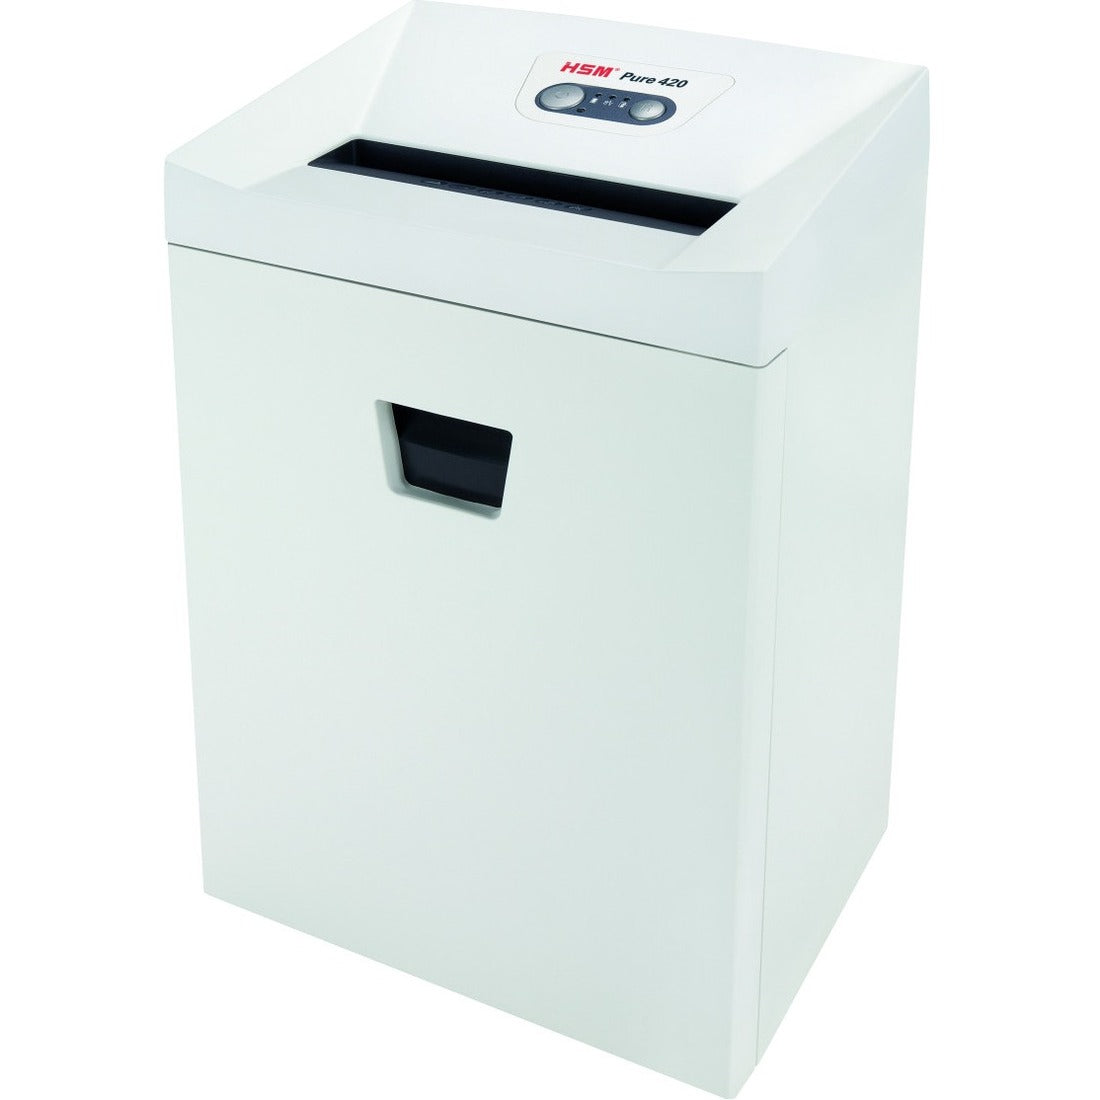 hsm-pure-420-3-16-x-1-1-8-continuous-shredder-particle-cut-15-per-pass-for-shredding-staples-paper-paper-clip-credit-card-cd-dvd-0188-x-1125-shred-size-p-4-o-3-t-4-e-3-f-1-945-throat-920-gal-wastebin-capacity-white-_hsm2343113 - 1